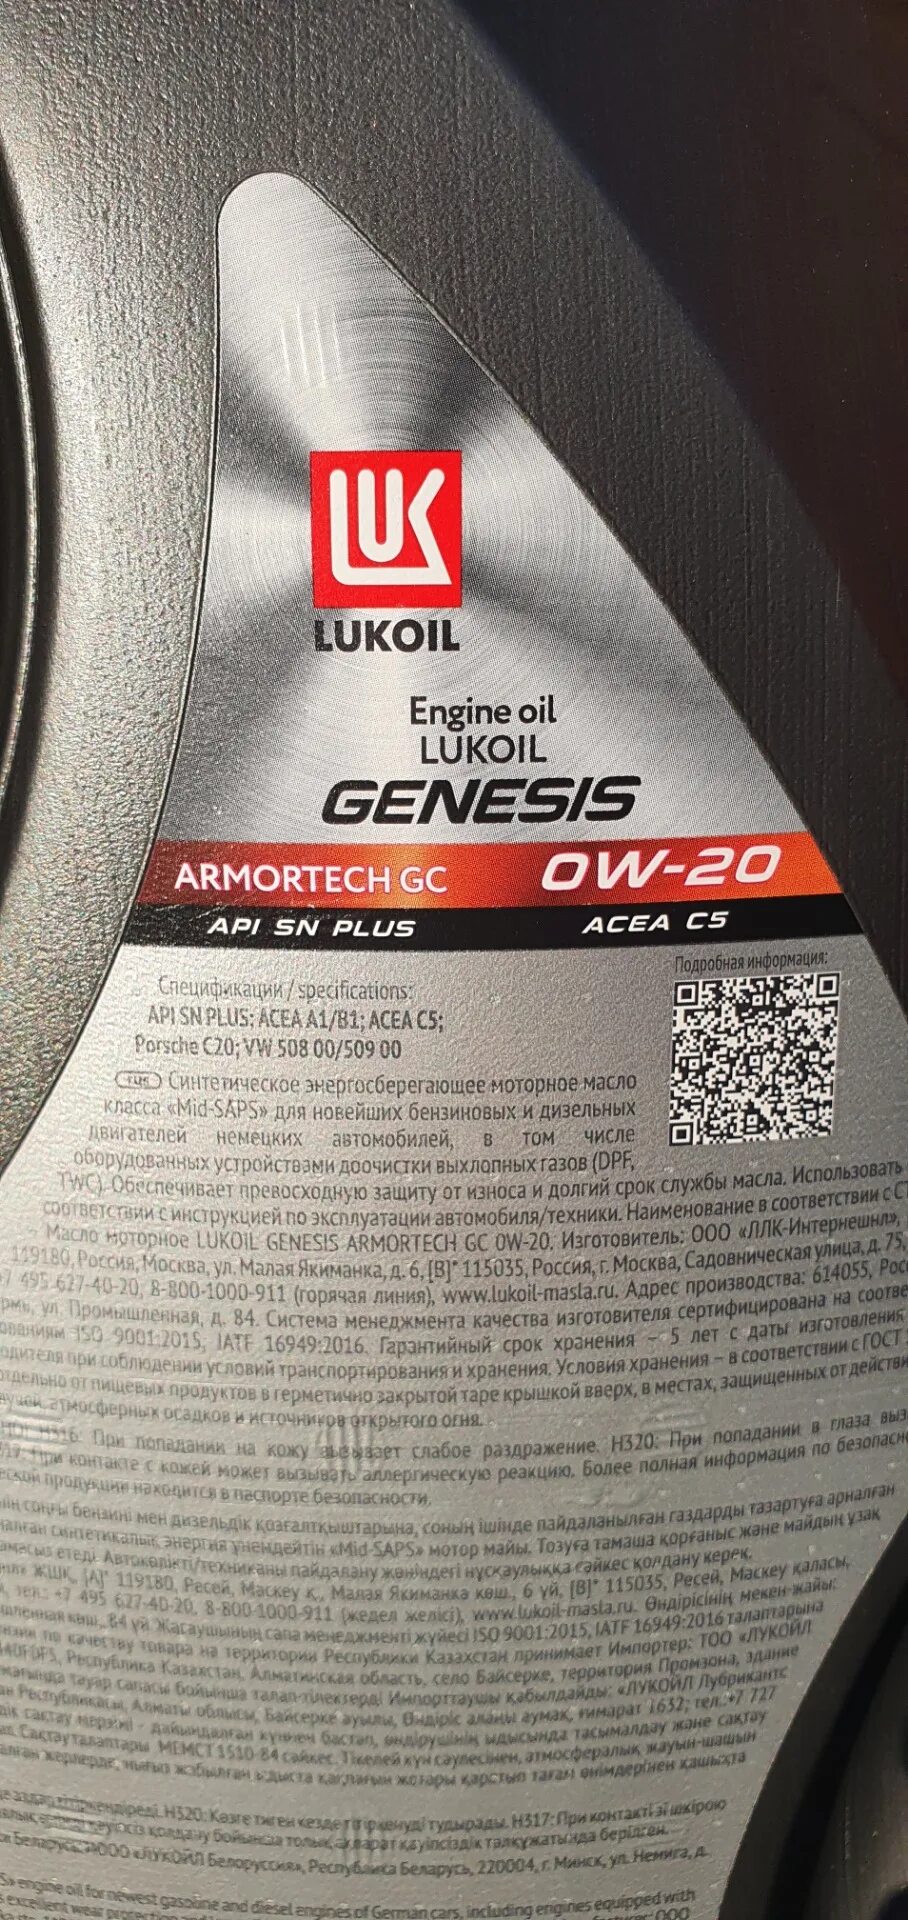 Масло 0w20 Lukoil. Масло Лукойл 0w30. Лукойл VW 508 00/509 00 цвет. Масло Лукойл 0w20. Лукойл 0w20 отзывы